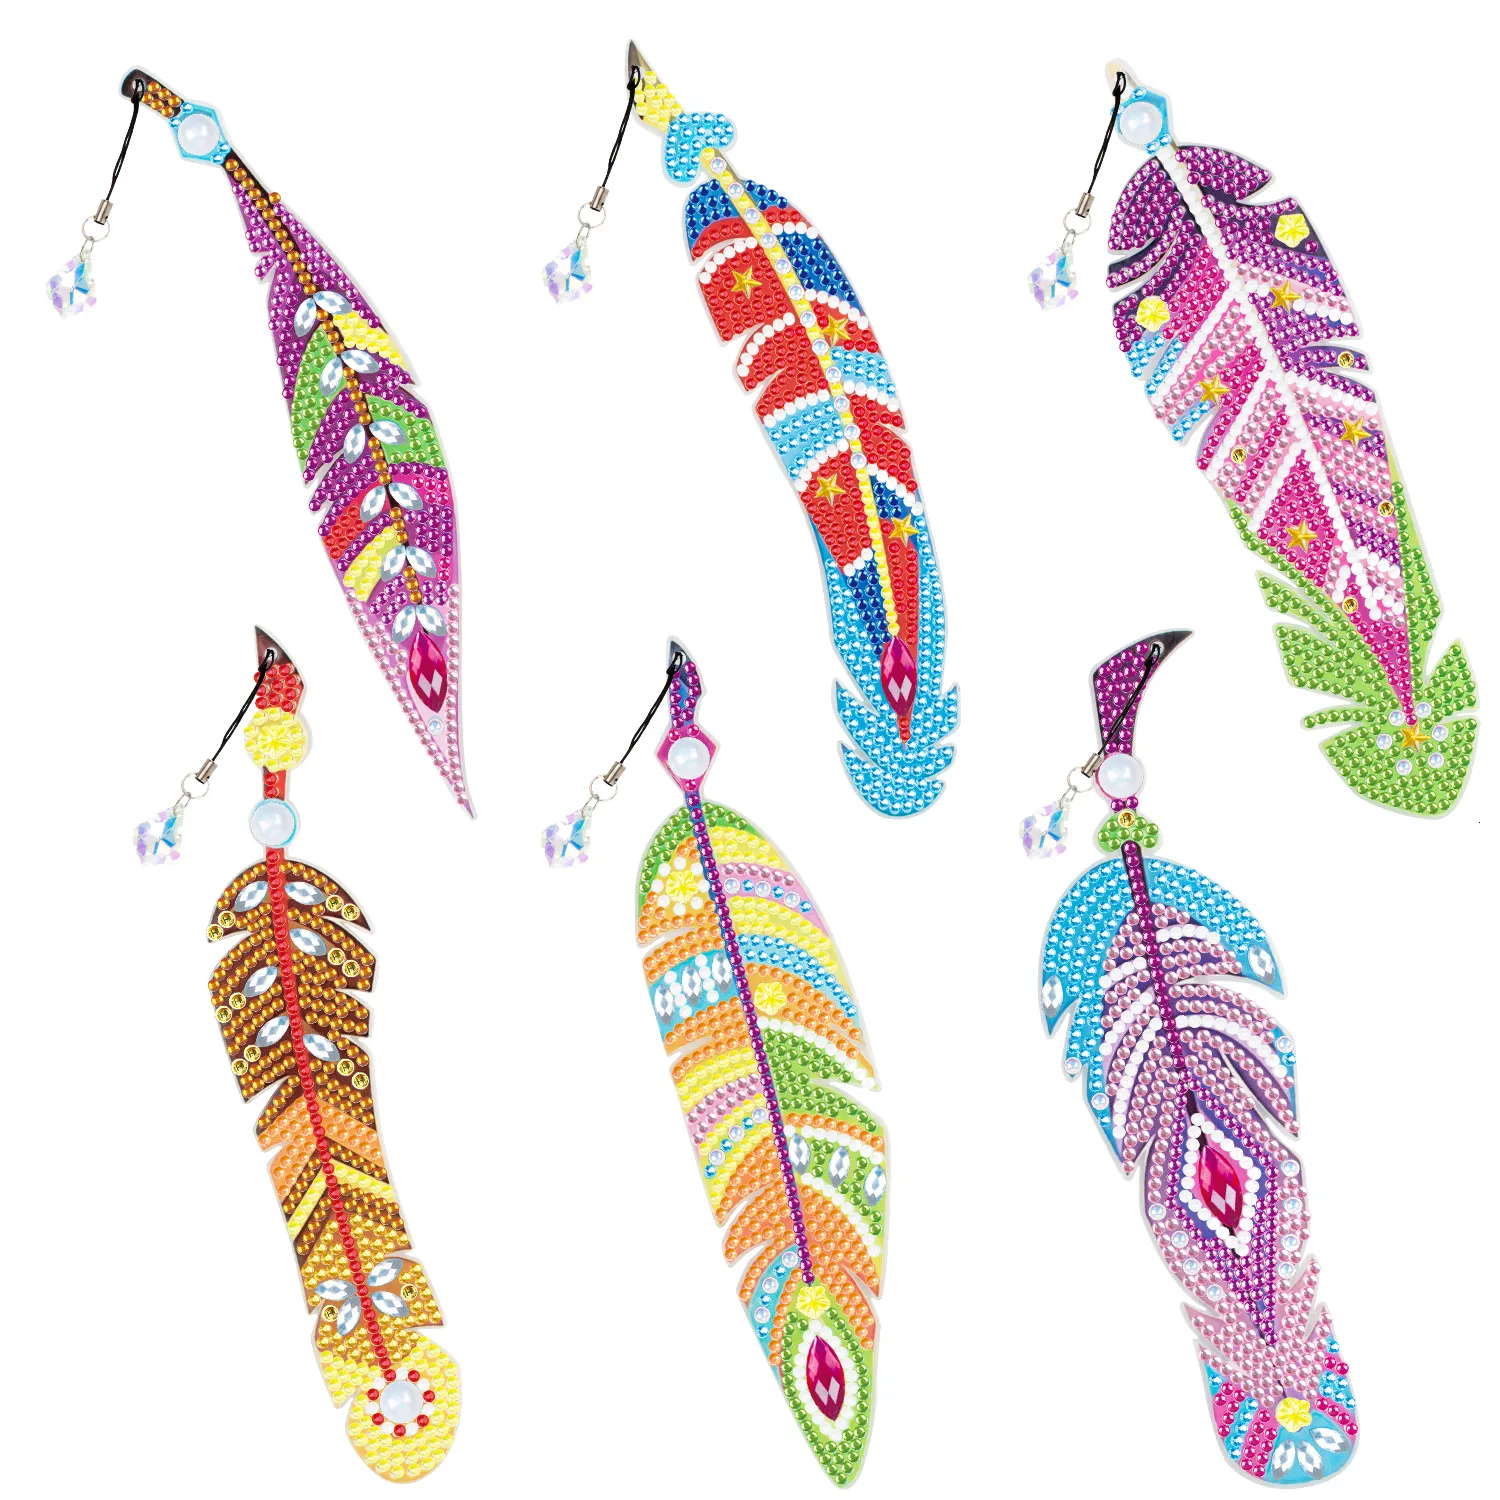 DIY Diamond Art Bookmark Kits Bookmark Set Maple Leaf Shape Embroidery  Mosaic Art Craft For Handmade Gifts Perfect For Events And Parties 230306  From Zuo10, $12.45